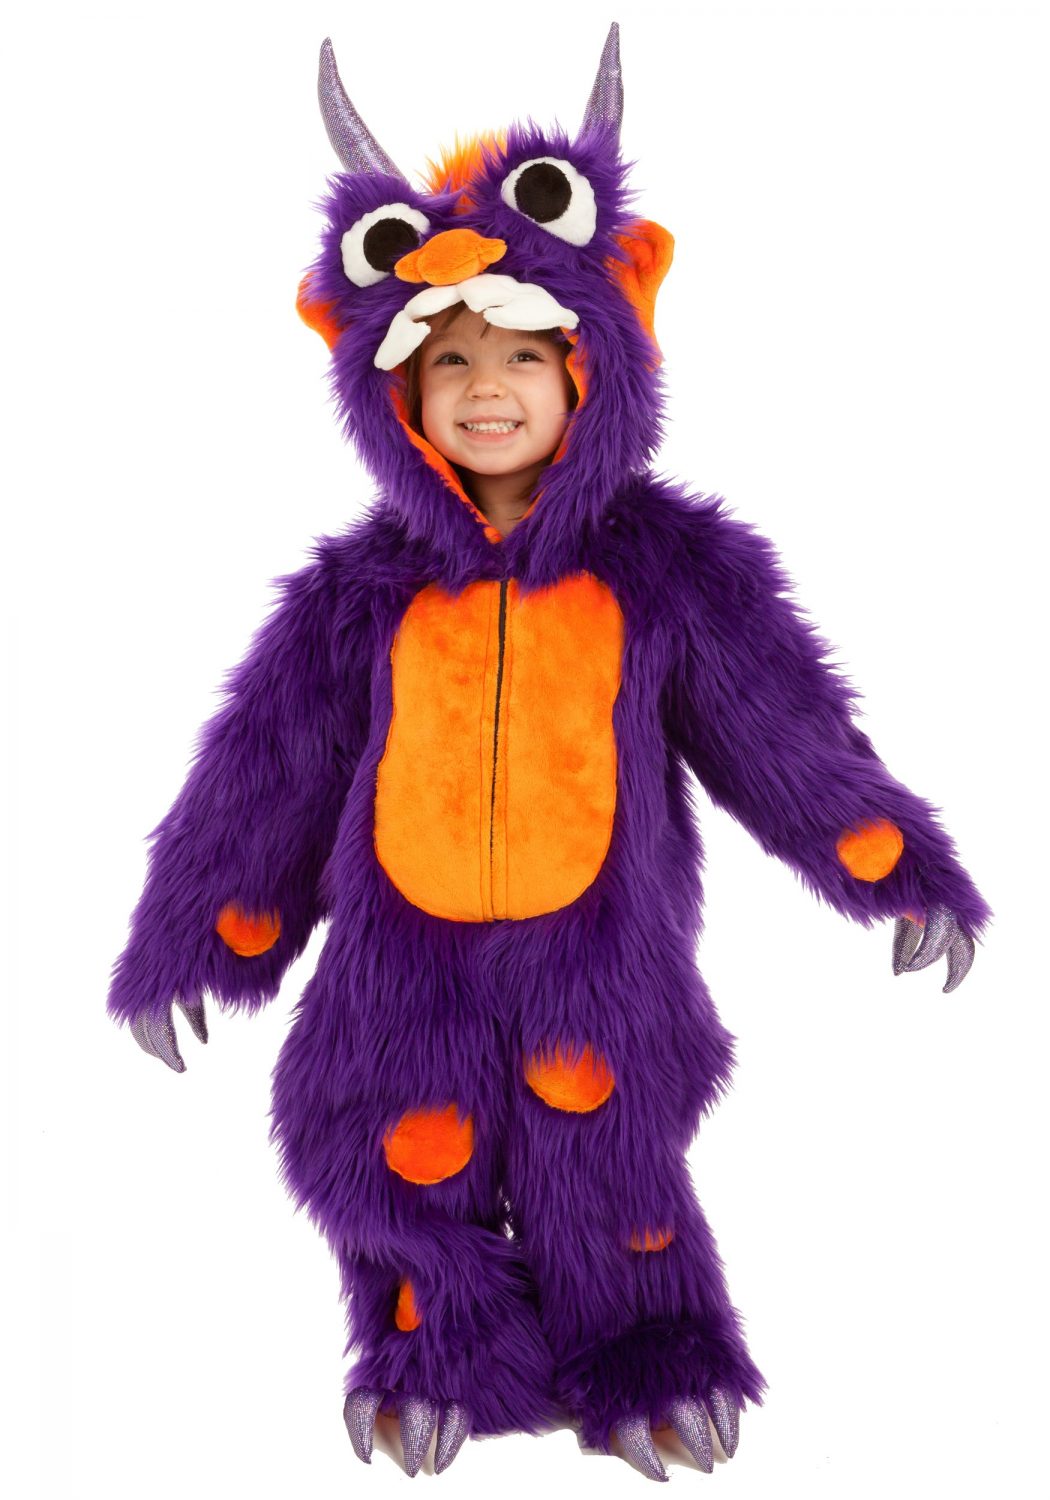 morris-the-monster-costume 5 Most Wanted Halloween Beanie Babies Costumes